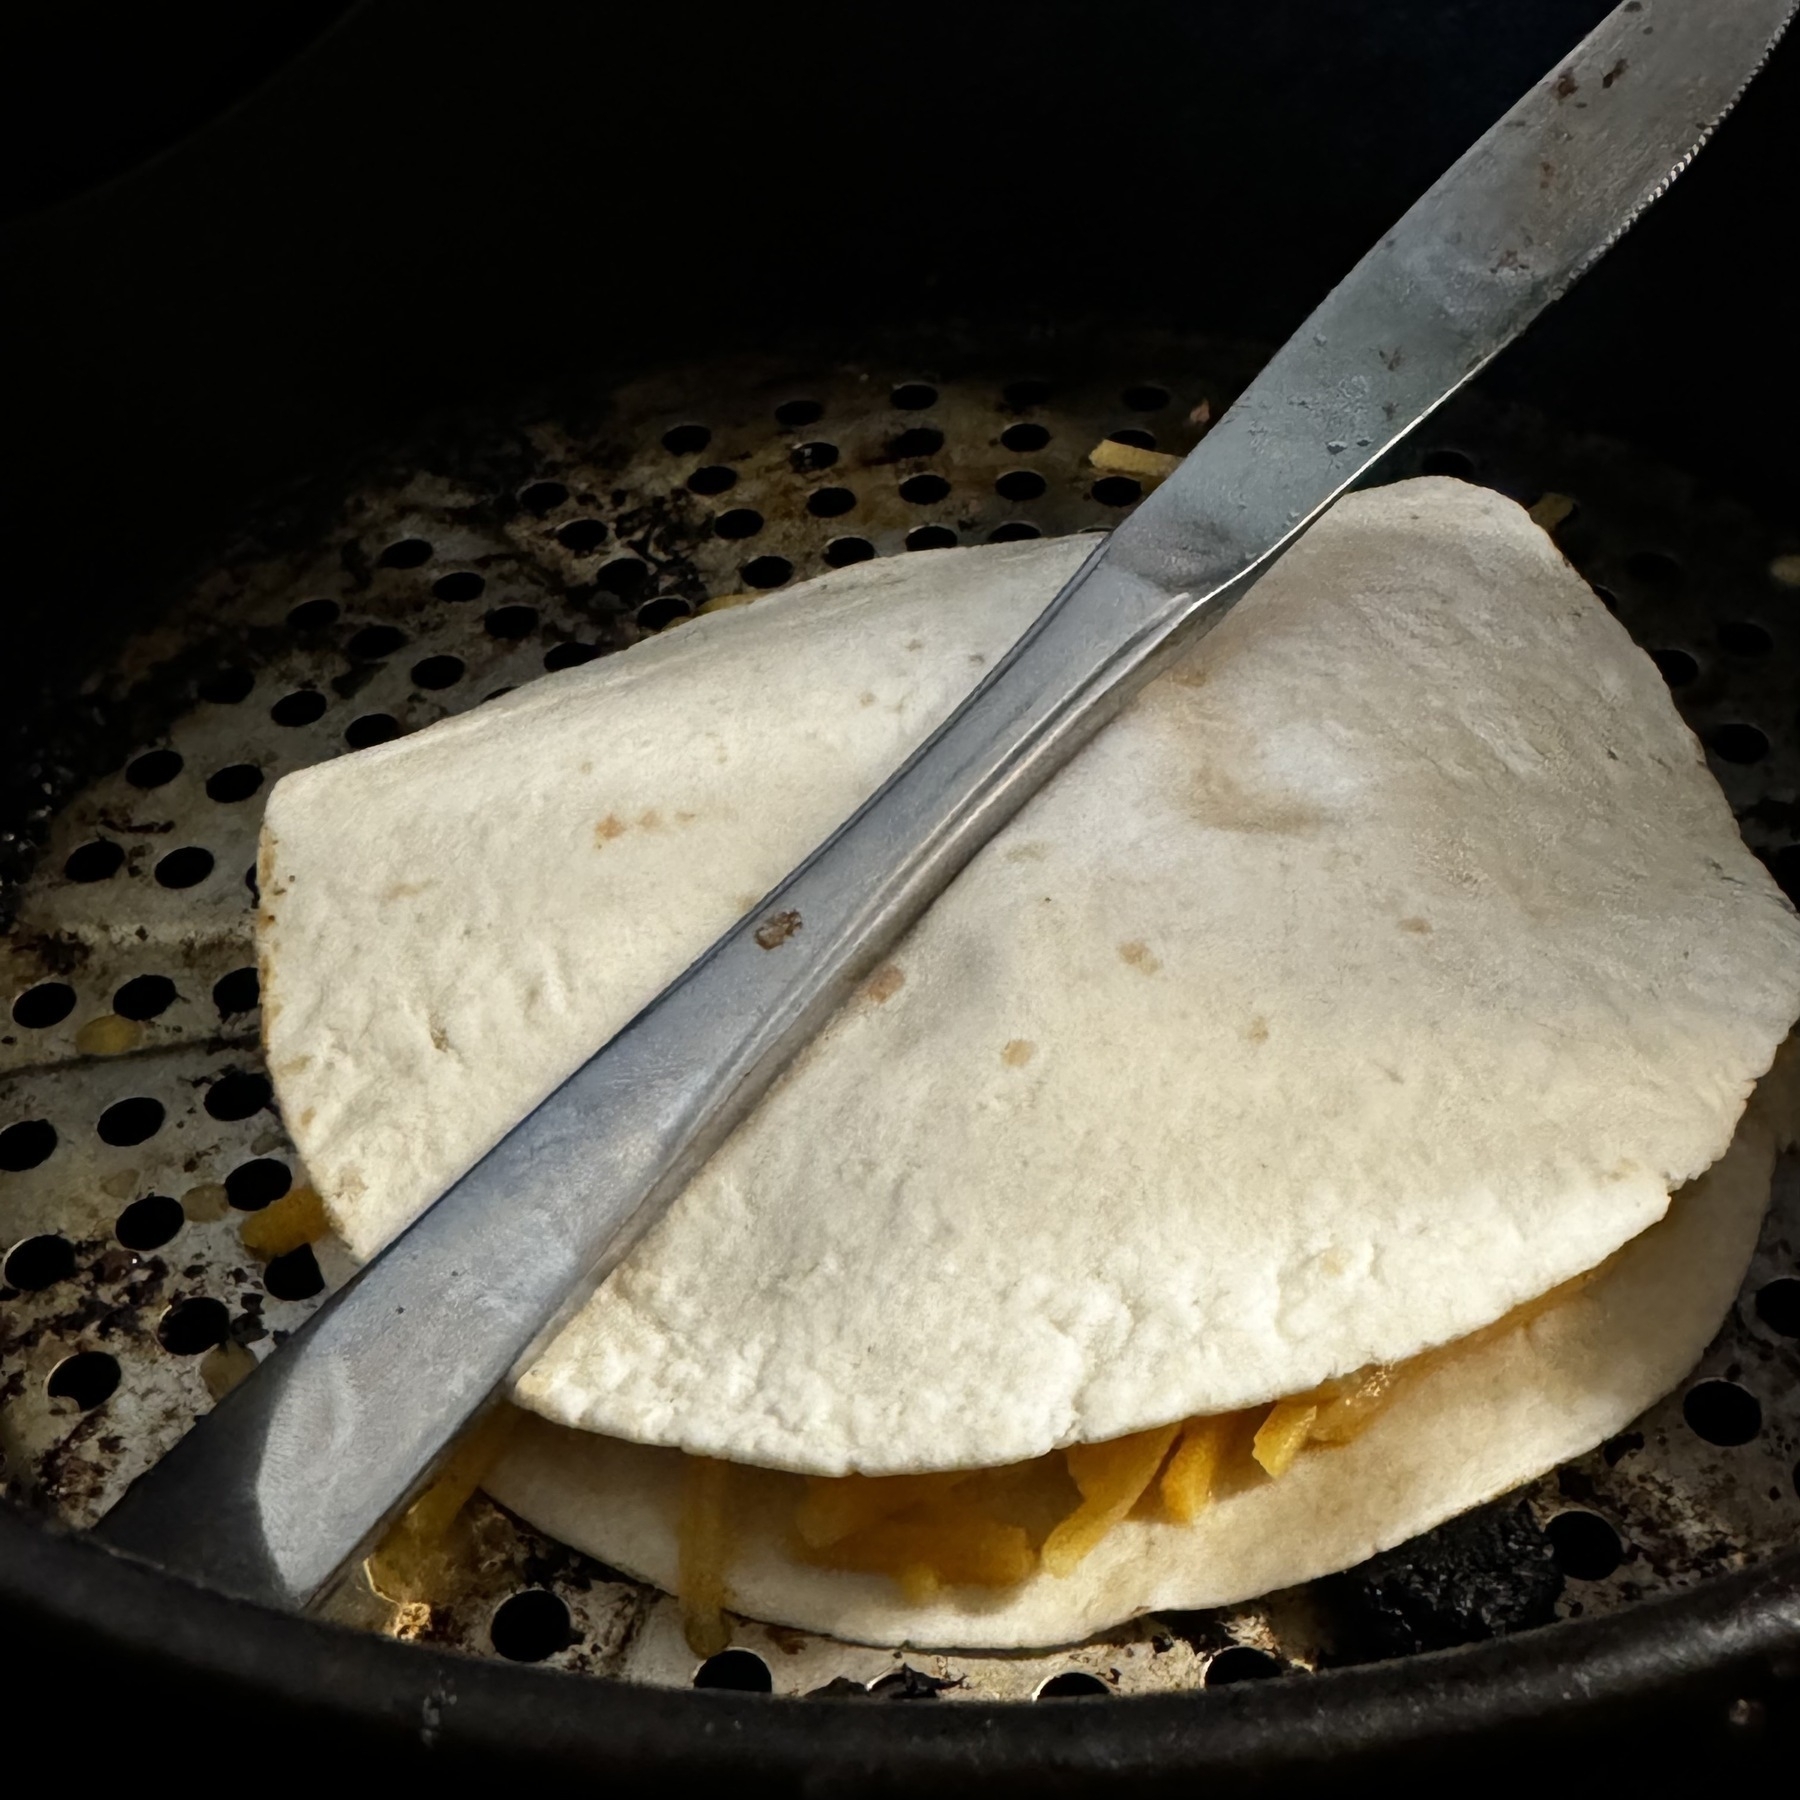 A knife is on top of a quesadilla in an air fryer basket. The quesadilla is made with two tortillas and cheese and sauerkraut